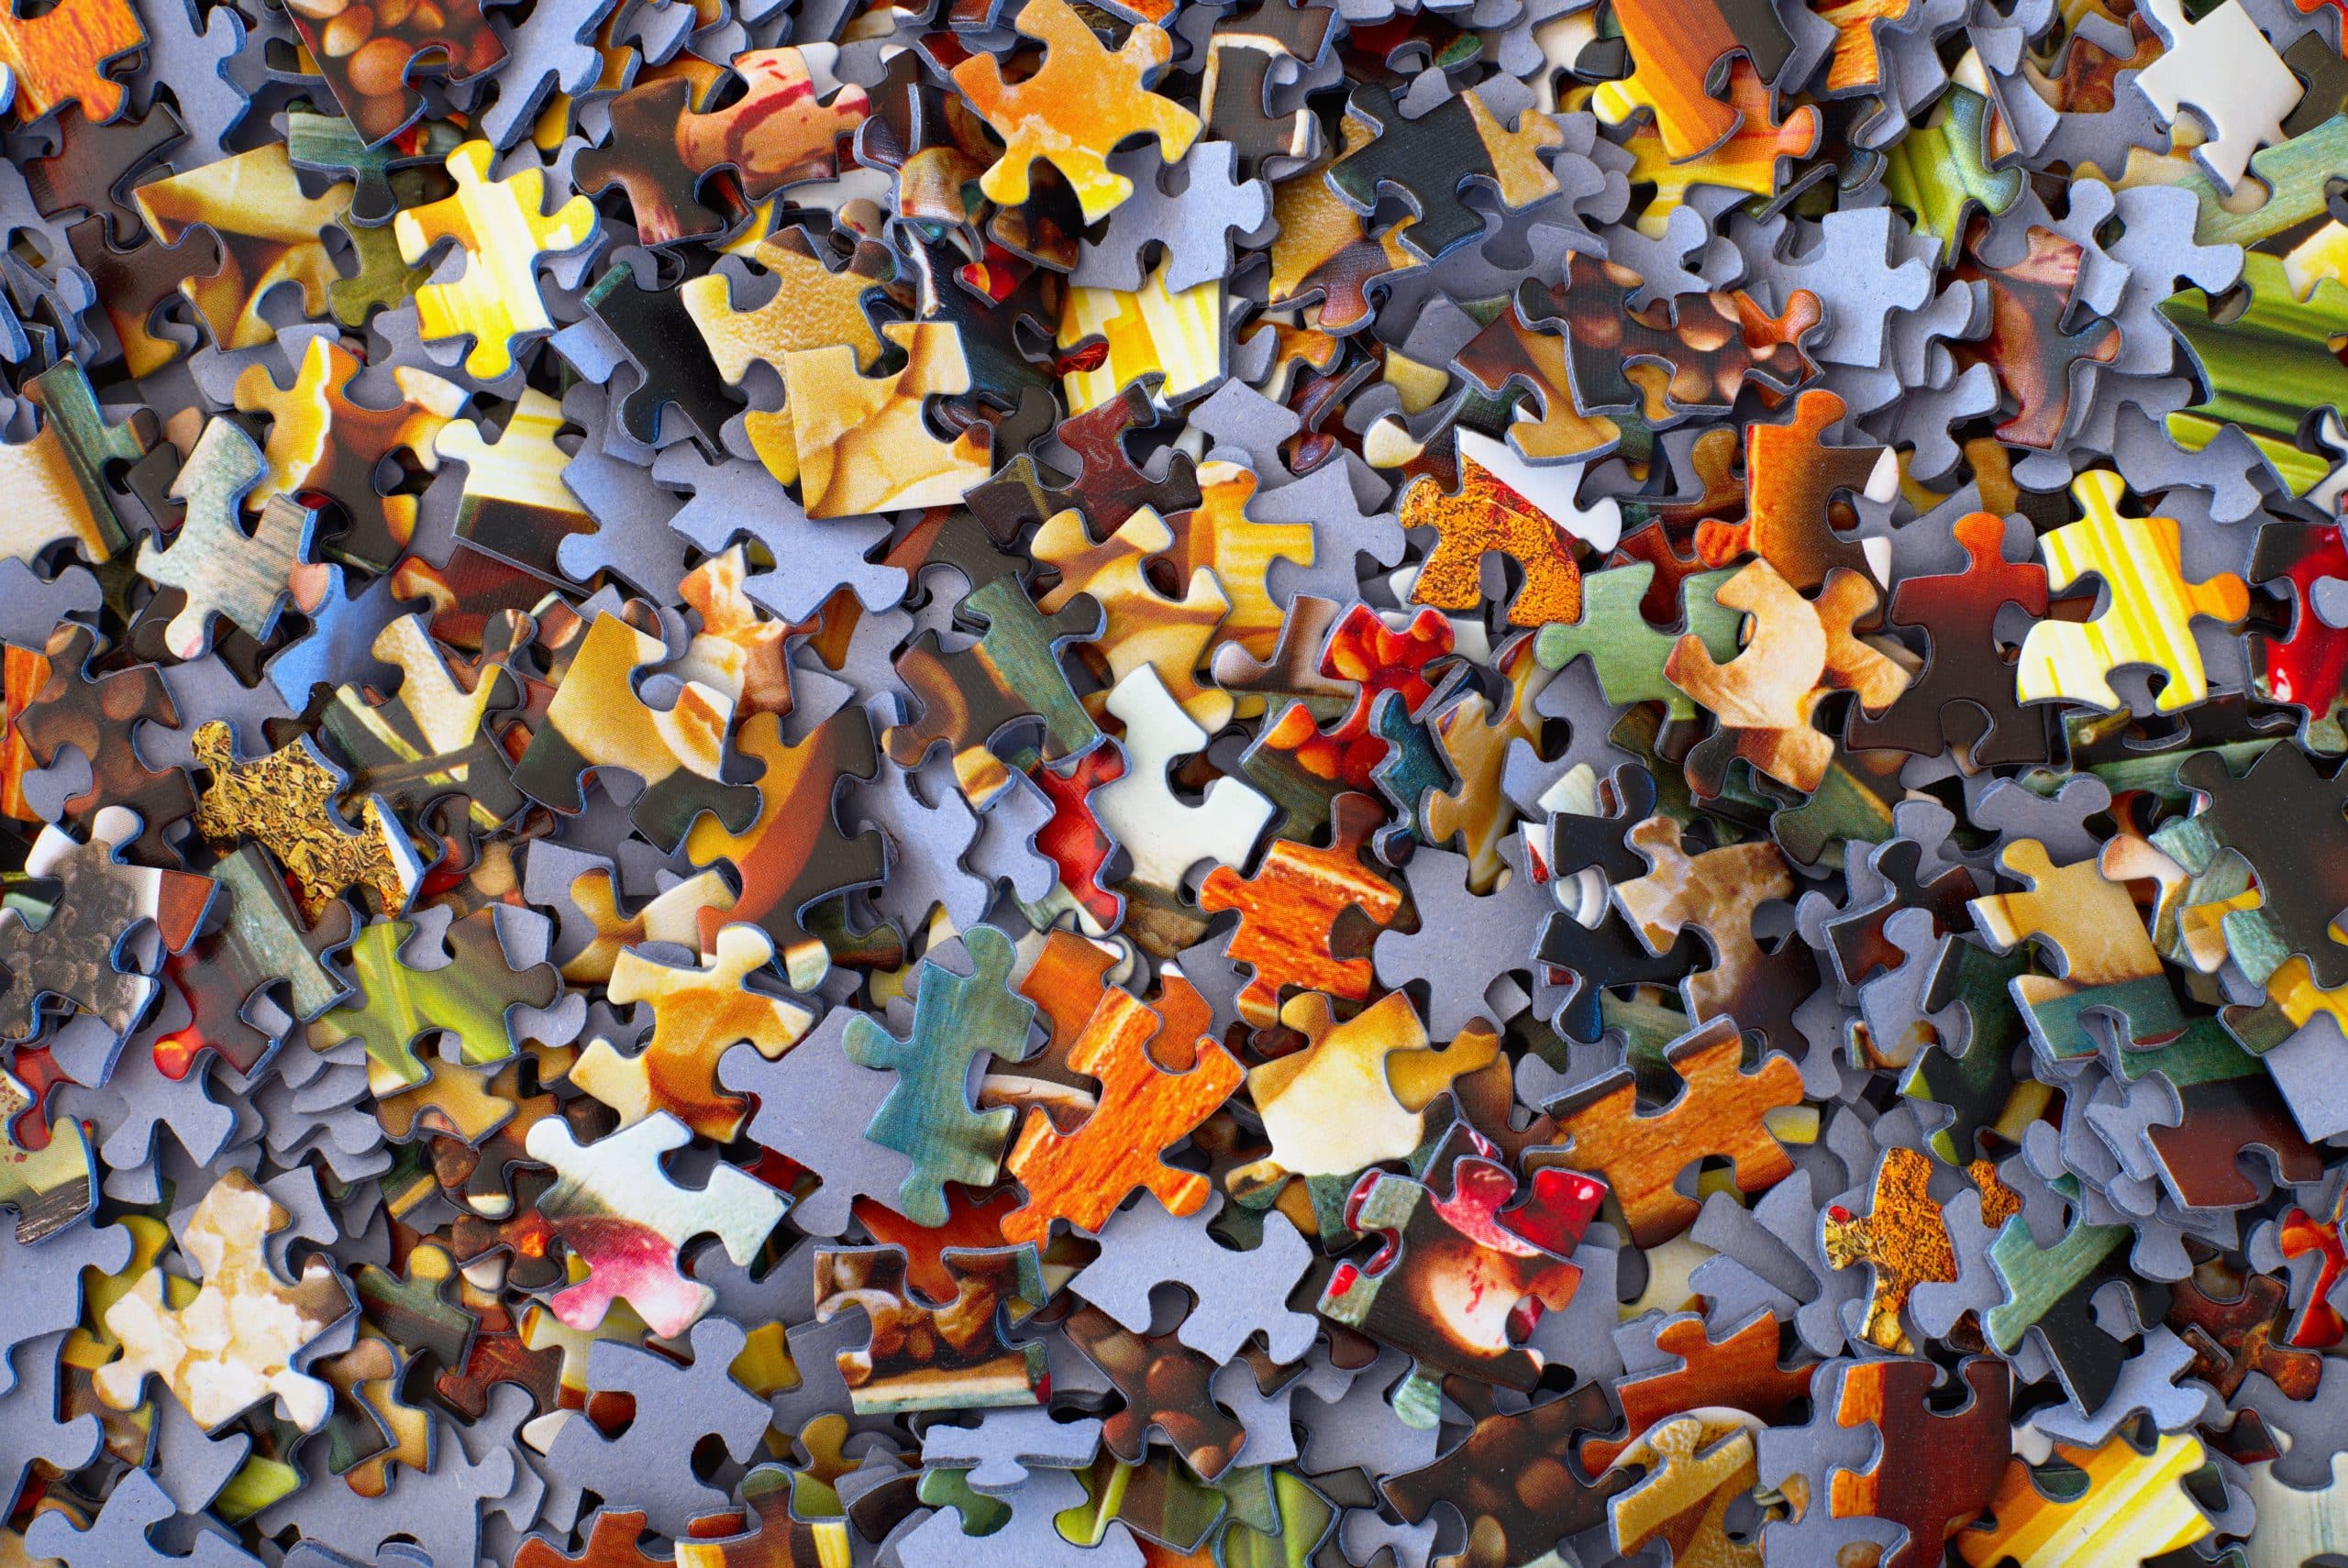 A close-up of numerous mixed jigsaw puzzle pieces, displaying various colors and patterns, scattered randomly, much like the initial stages of process improvement.